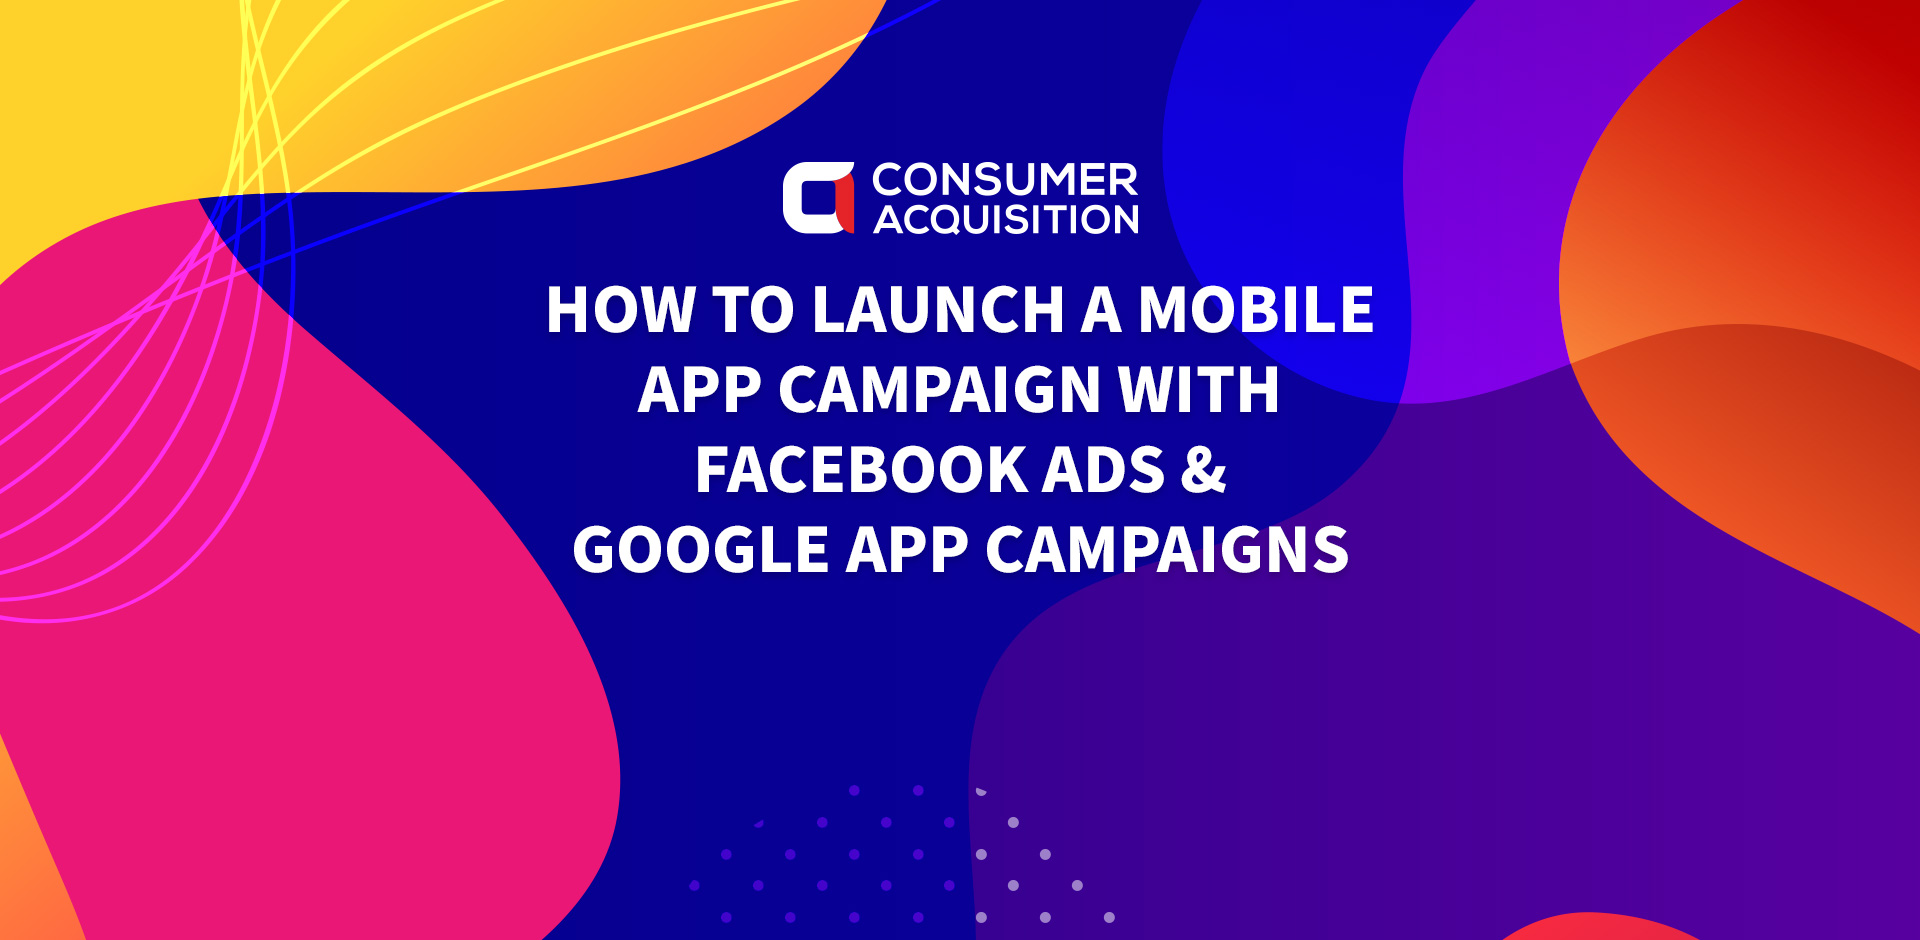 How to Launch a Mobile App Campaign with Facebook Ads & Google App Campaigns